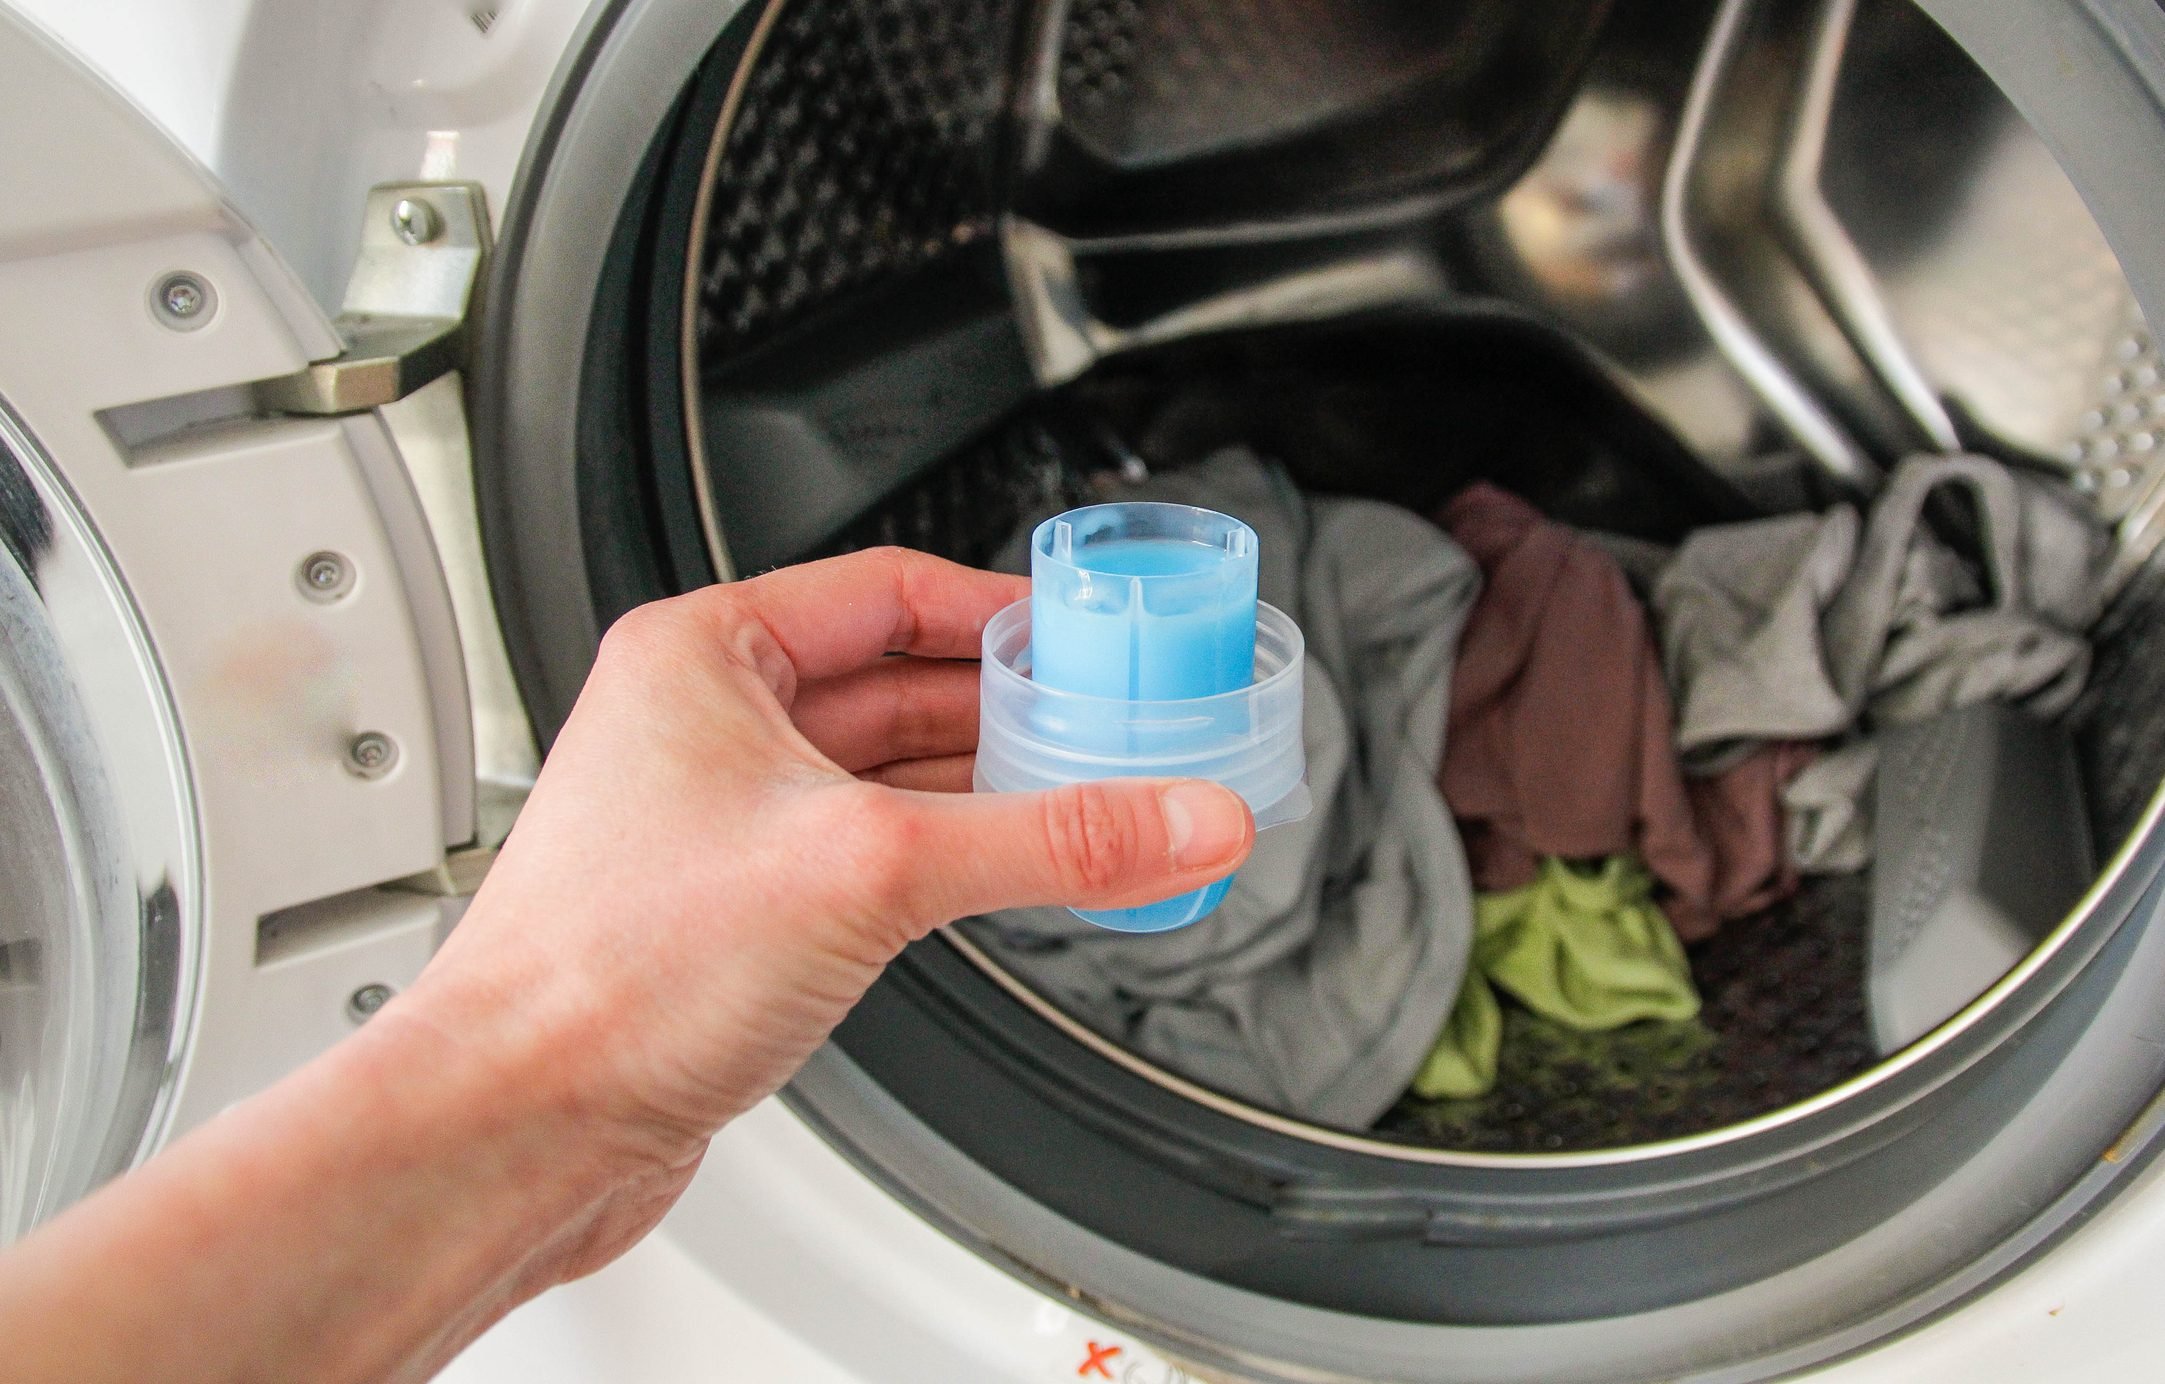 The Different Types of Laundry/Washing Machine Detergents